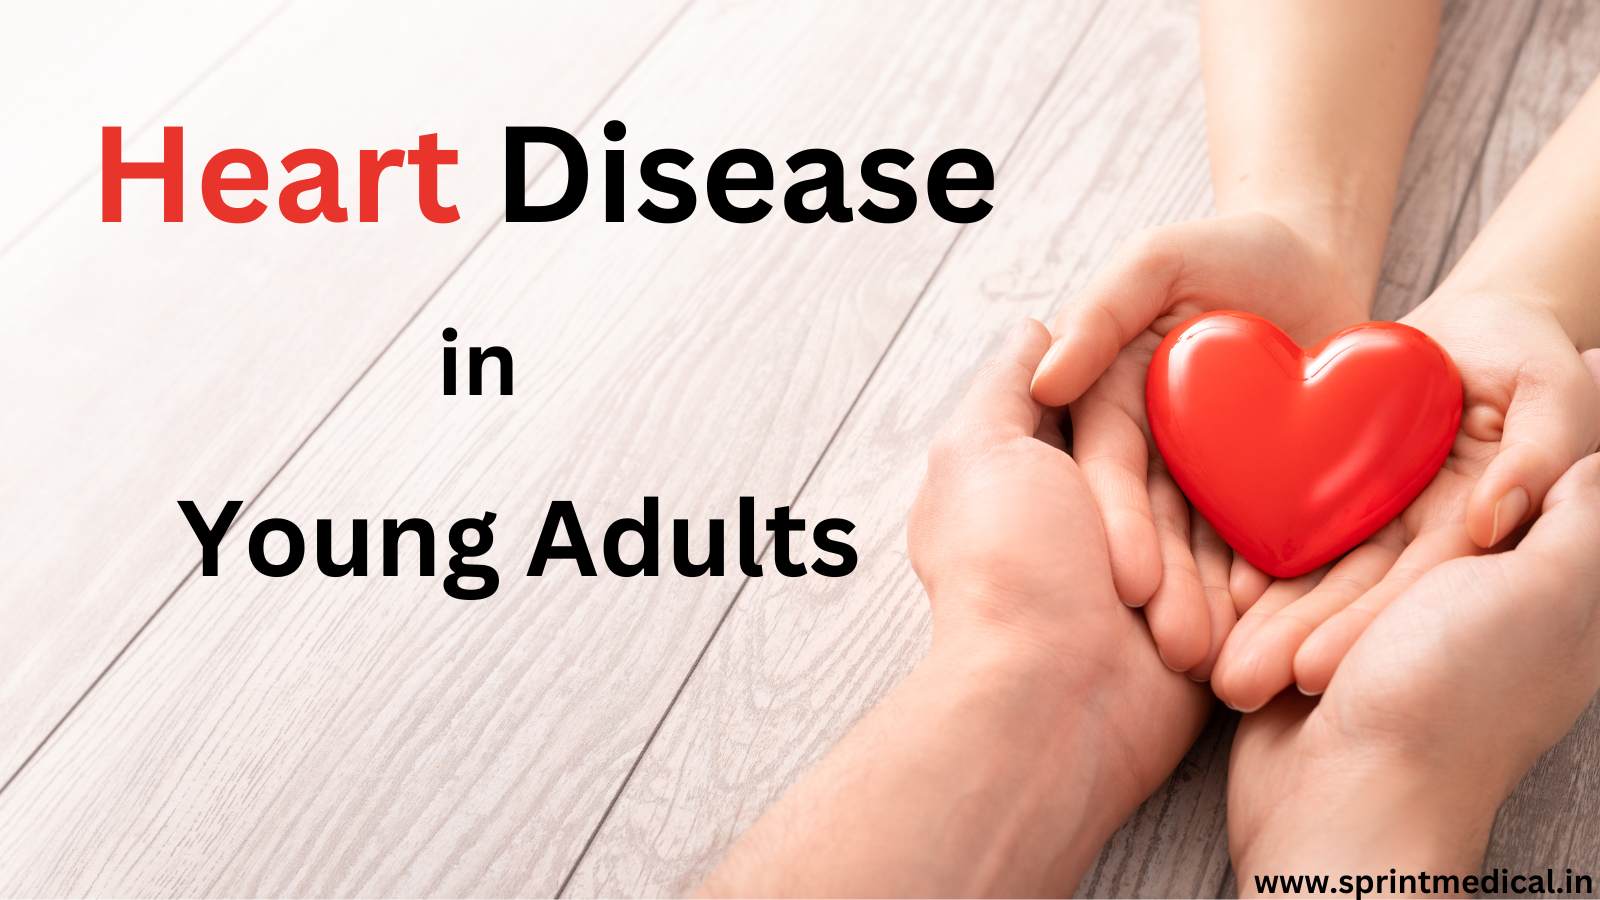 Heart Disease in young adults